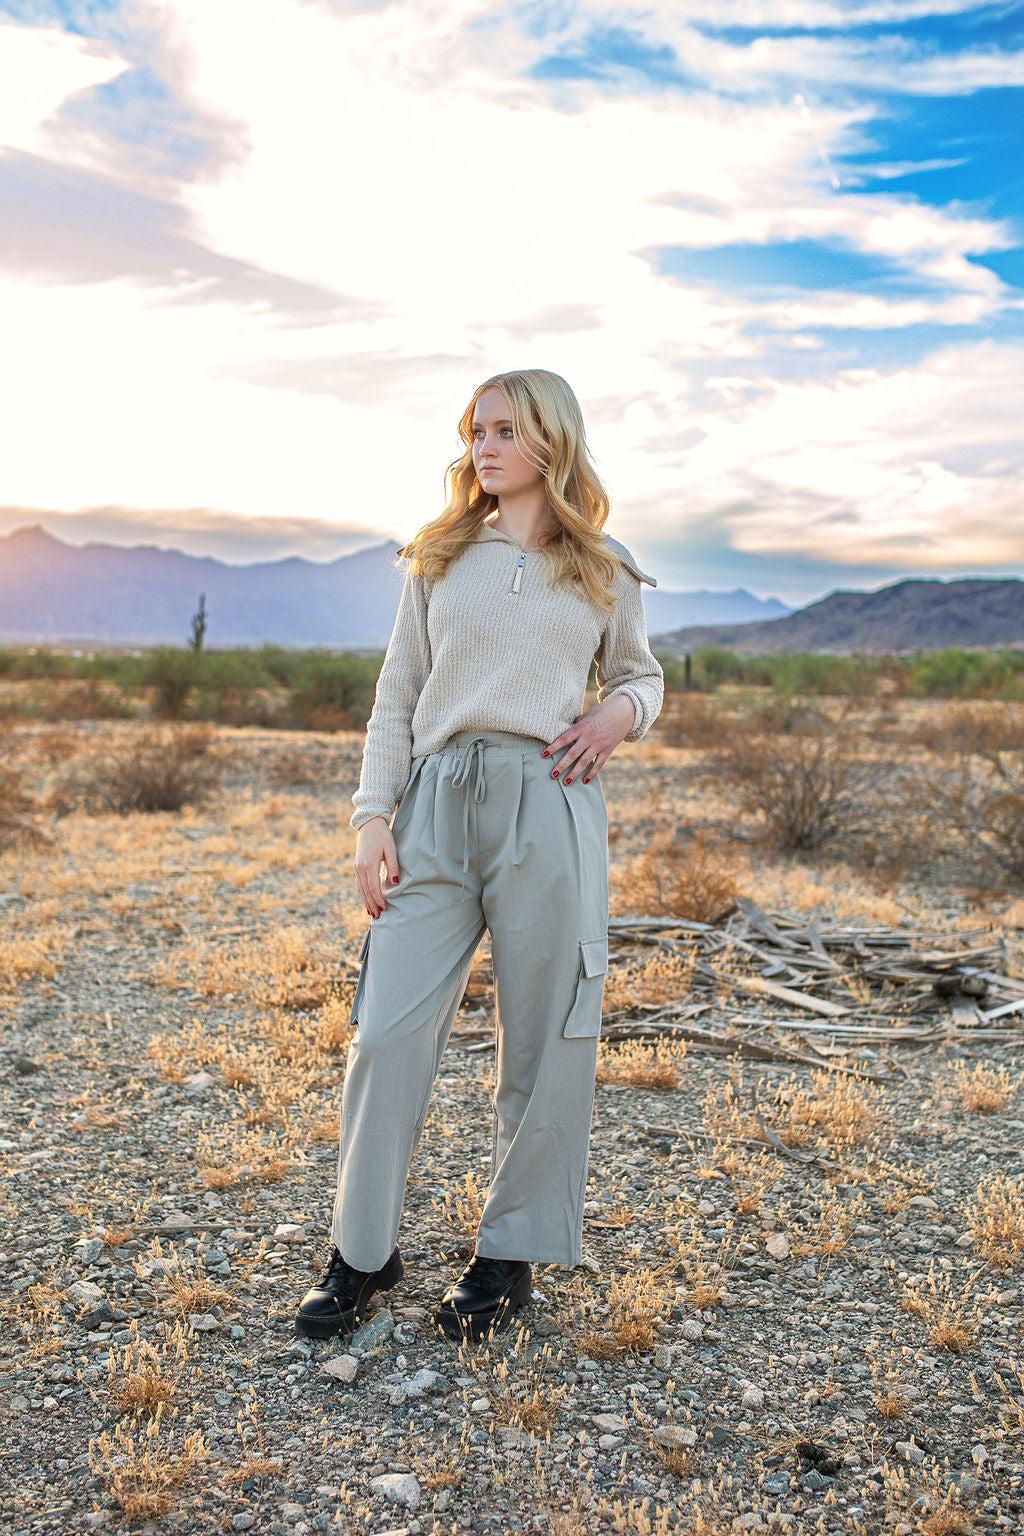 Smooth Twill Cargo Wide Leg Pleated Pants-160 Bottoms-Cargo Pants, Gray Pants, Max Retail, sale, Smooth Twill Cargo Wide Leg Pants-[option4]-[option5]-[option6]-Womens-USA-Clothing-Boutique-Shop-Online-Clothes Minded